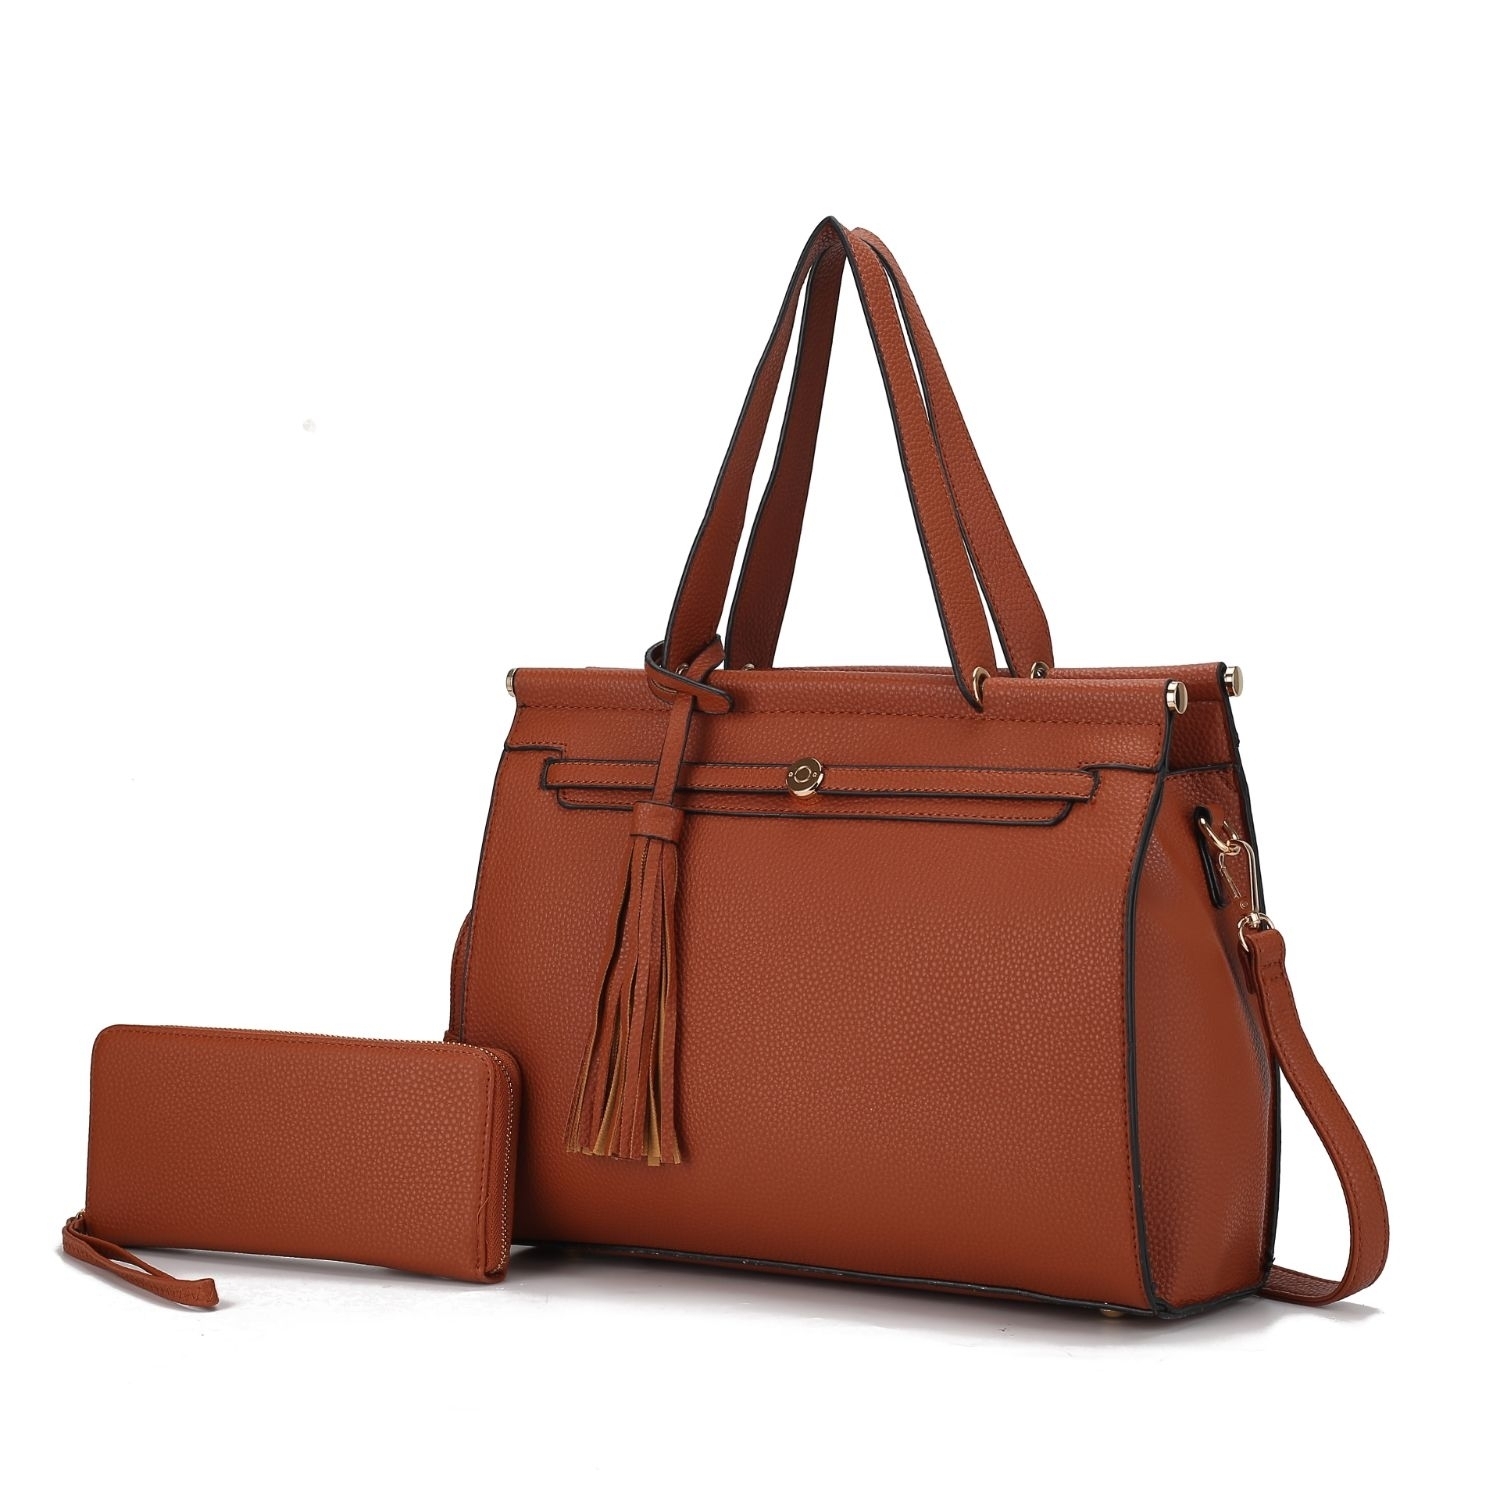 MKF Collection Shelby Vegan Leather Women's Satchel Bag By Mia K With Wallet -2 Pieces - Brown